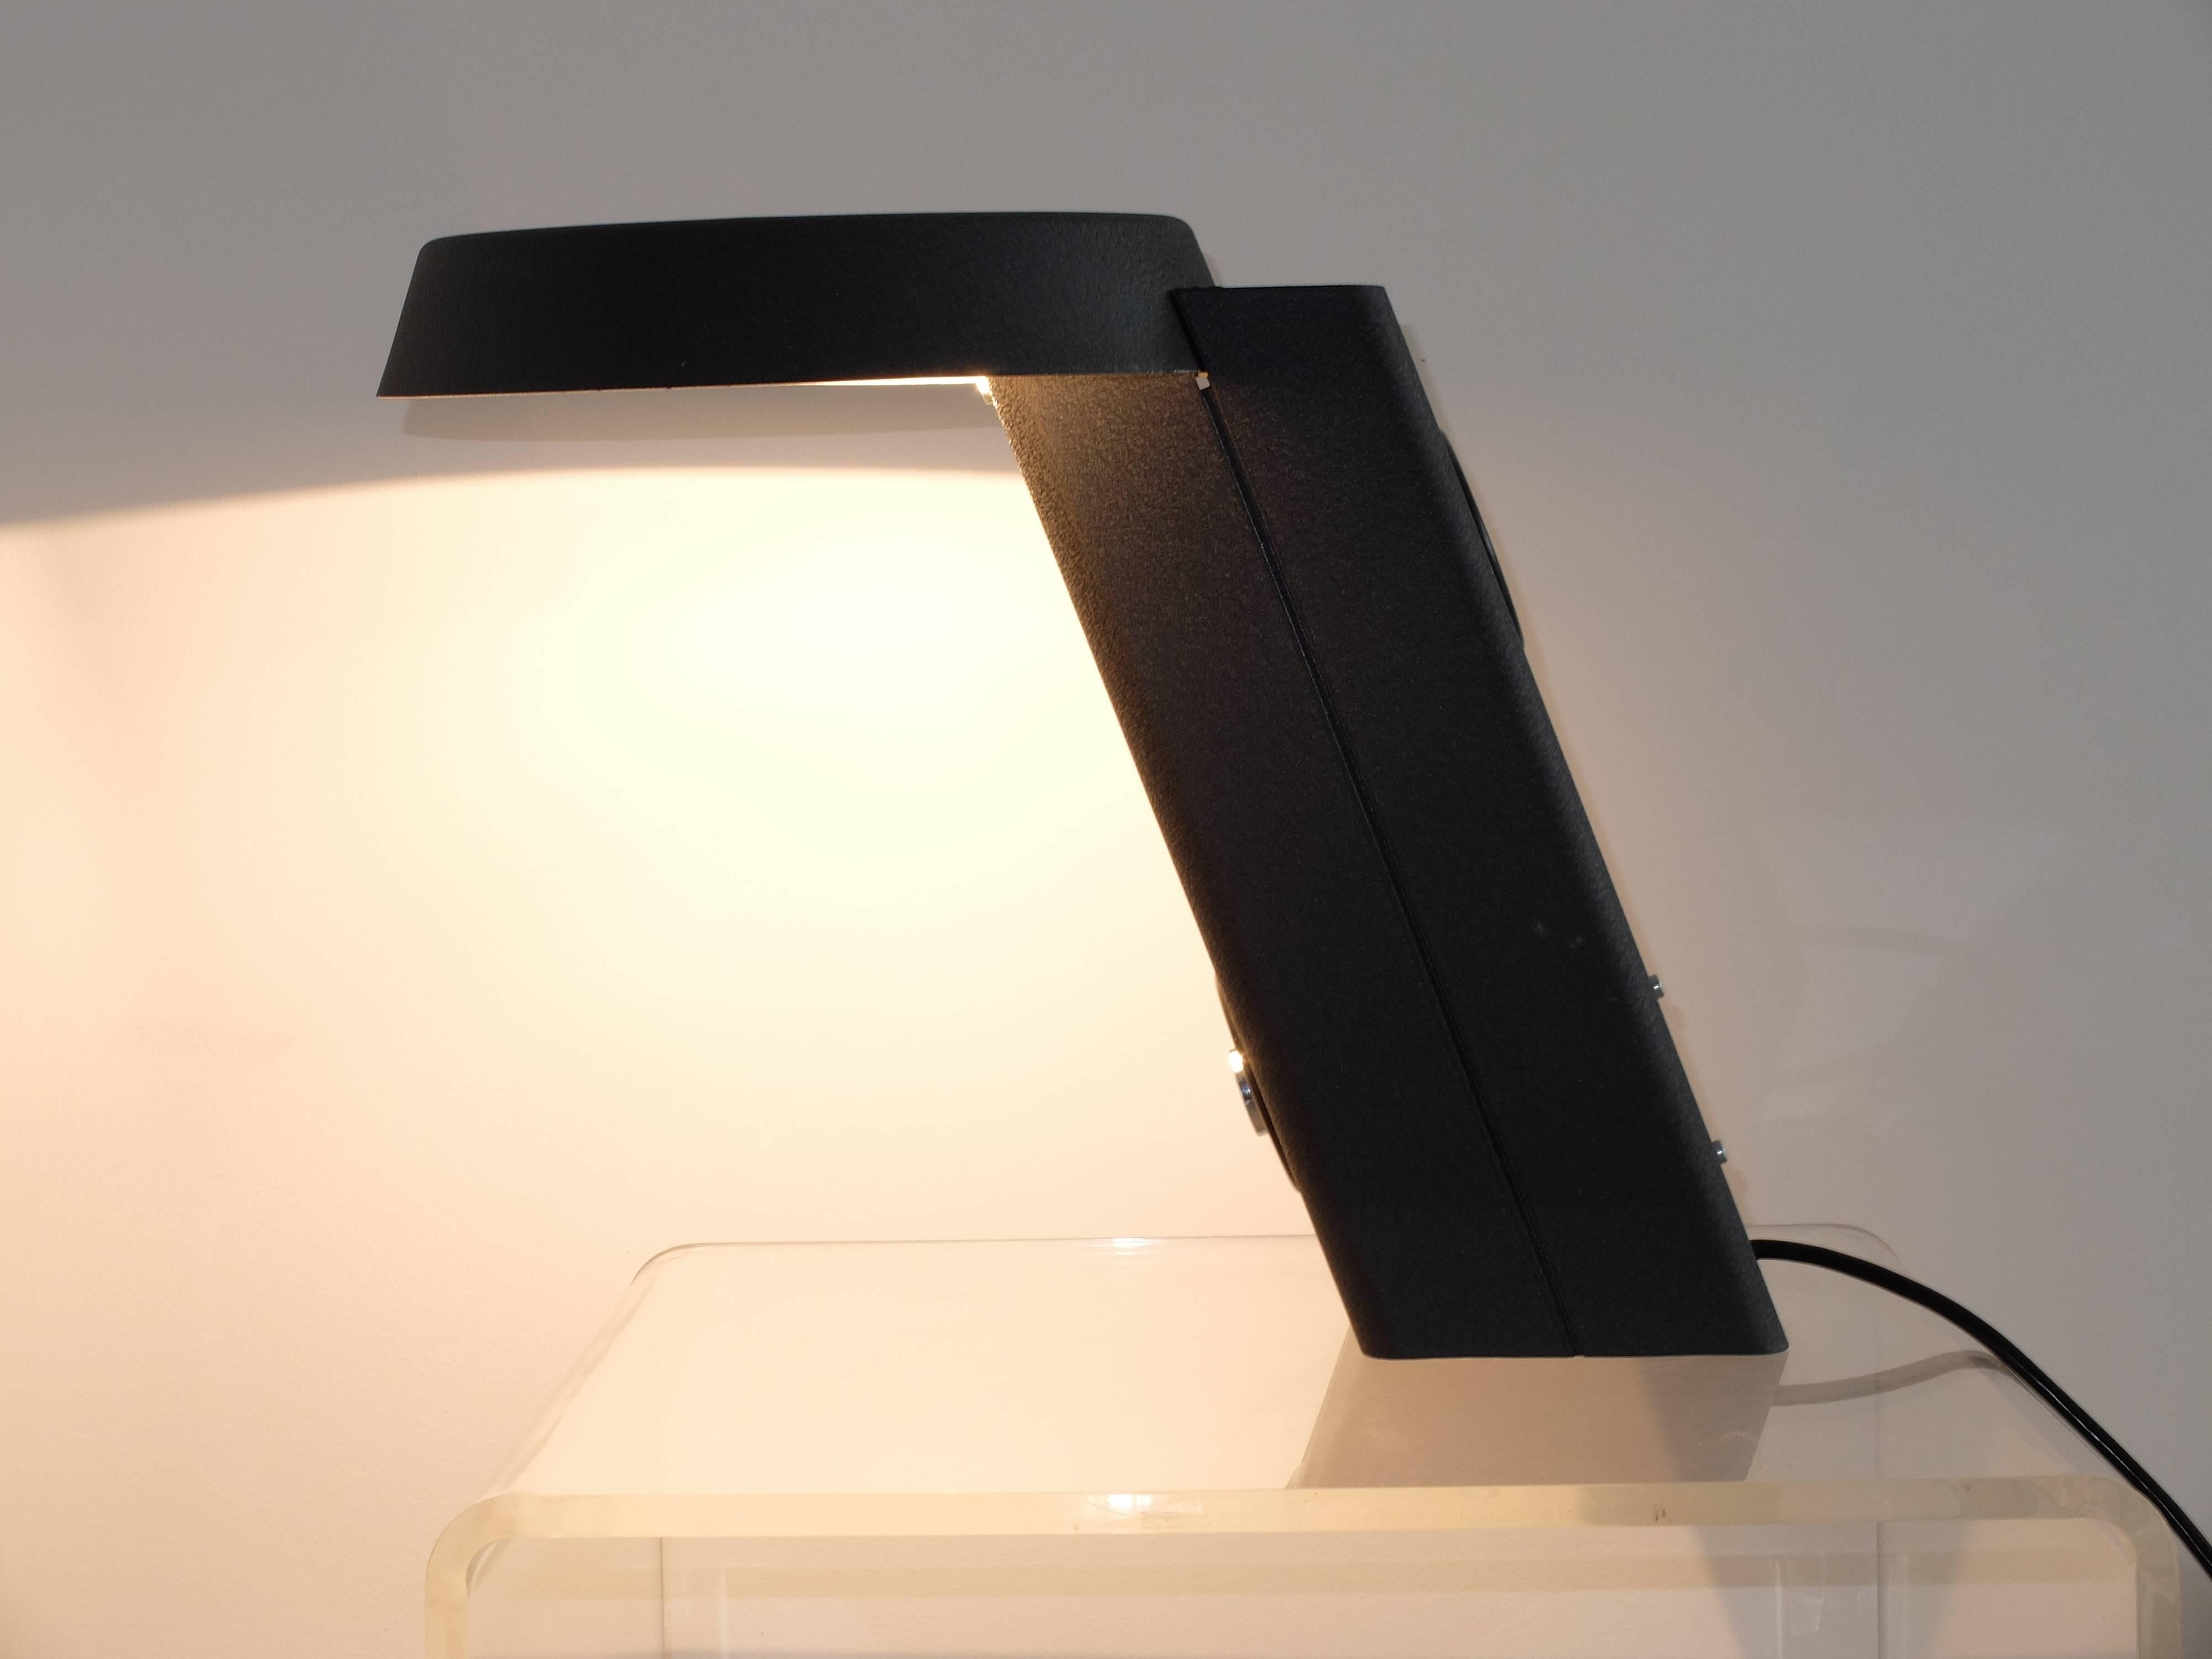 Made in 1971 by Arteluce.
Anthracite lacquered crackled aluminium structure.
Sarfatti was so ahead of the curve. This lamp was the first ever halogen lamp.
Signed with AL sticker.
Gino Sarfatti 607.

